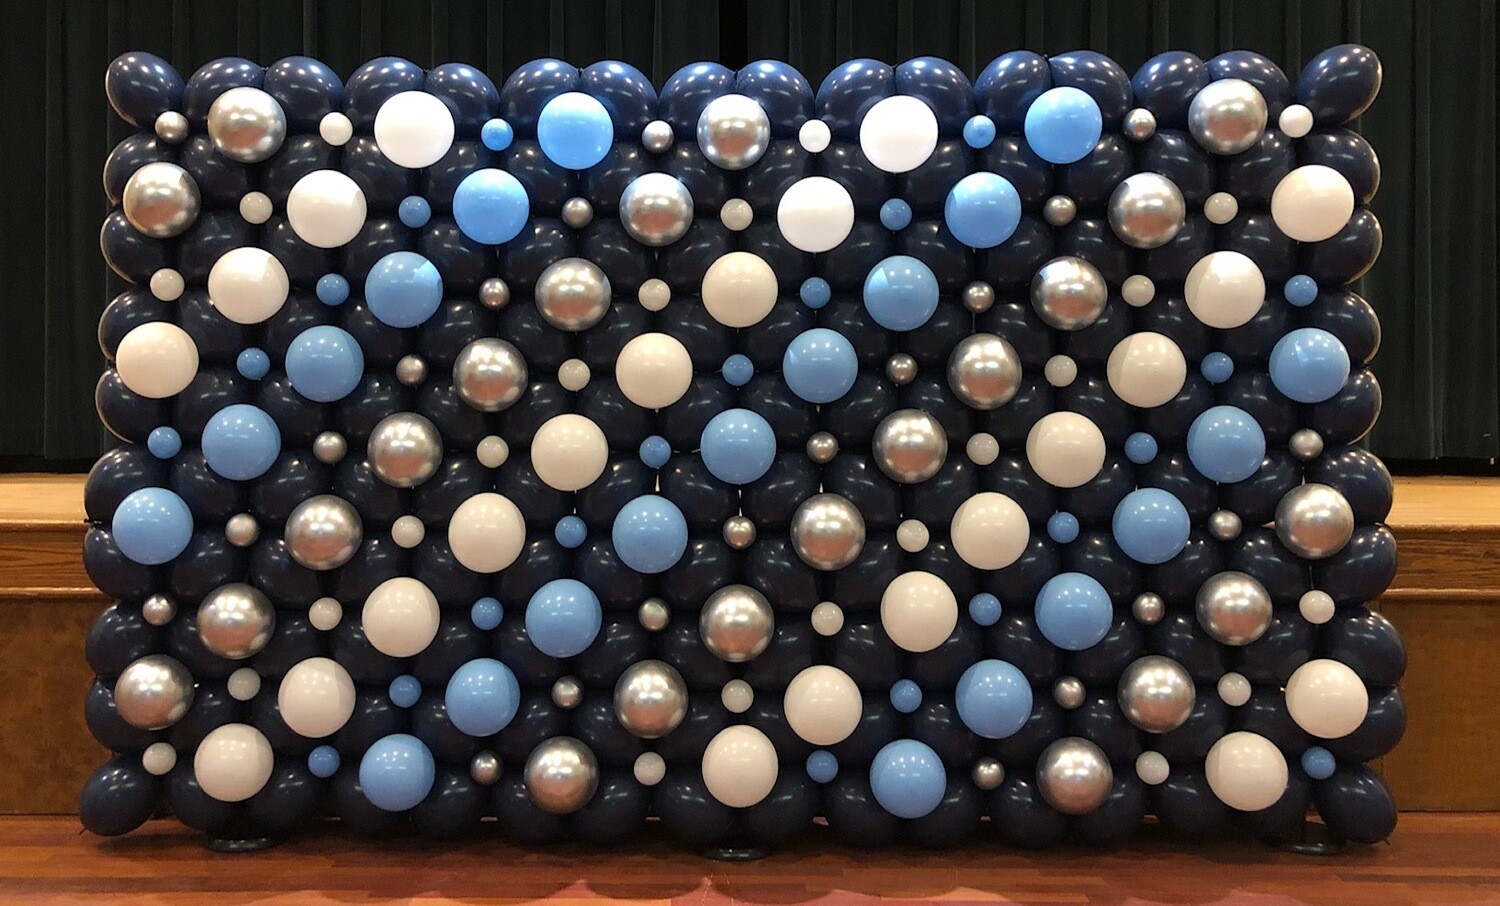 Balloon walls, indoors, traditional single layer (even sized bubbles)